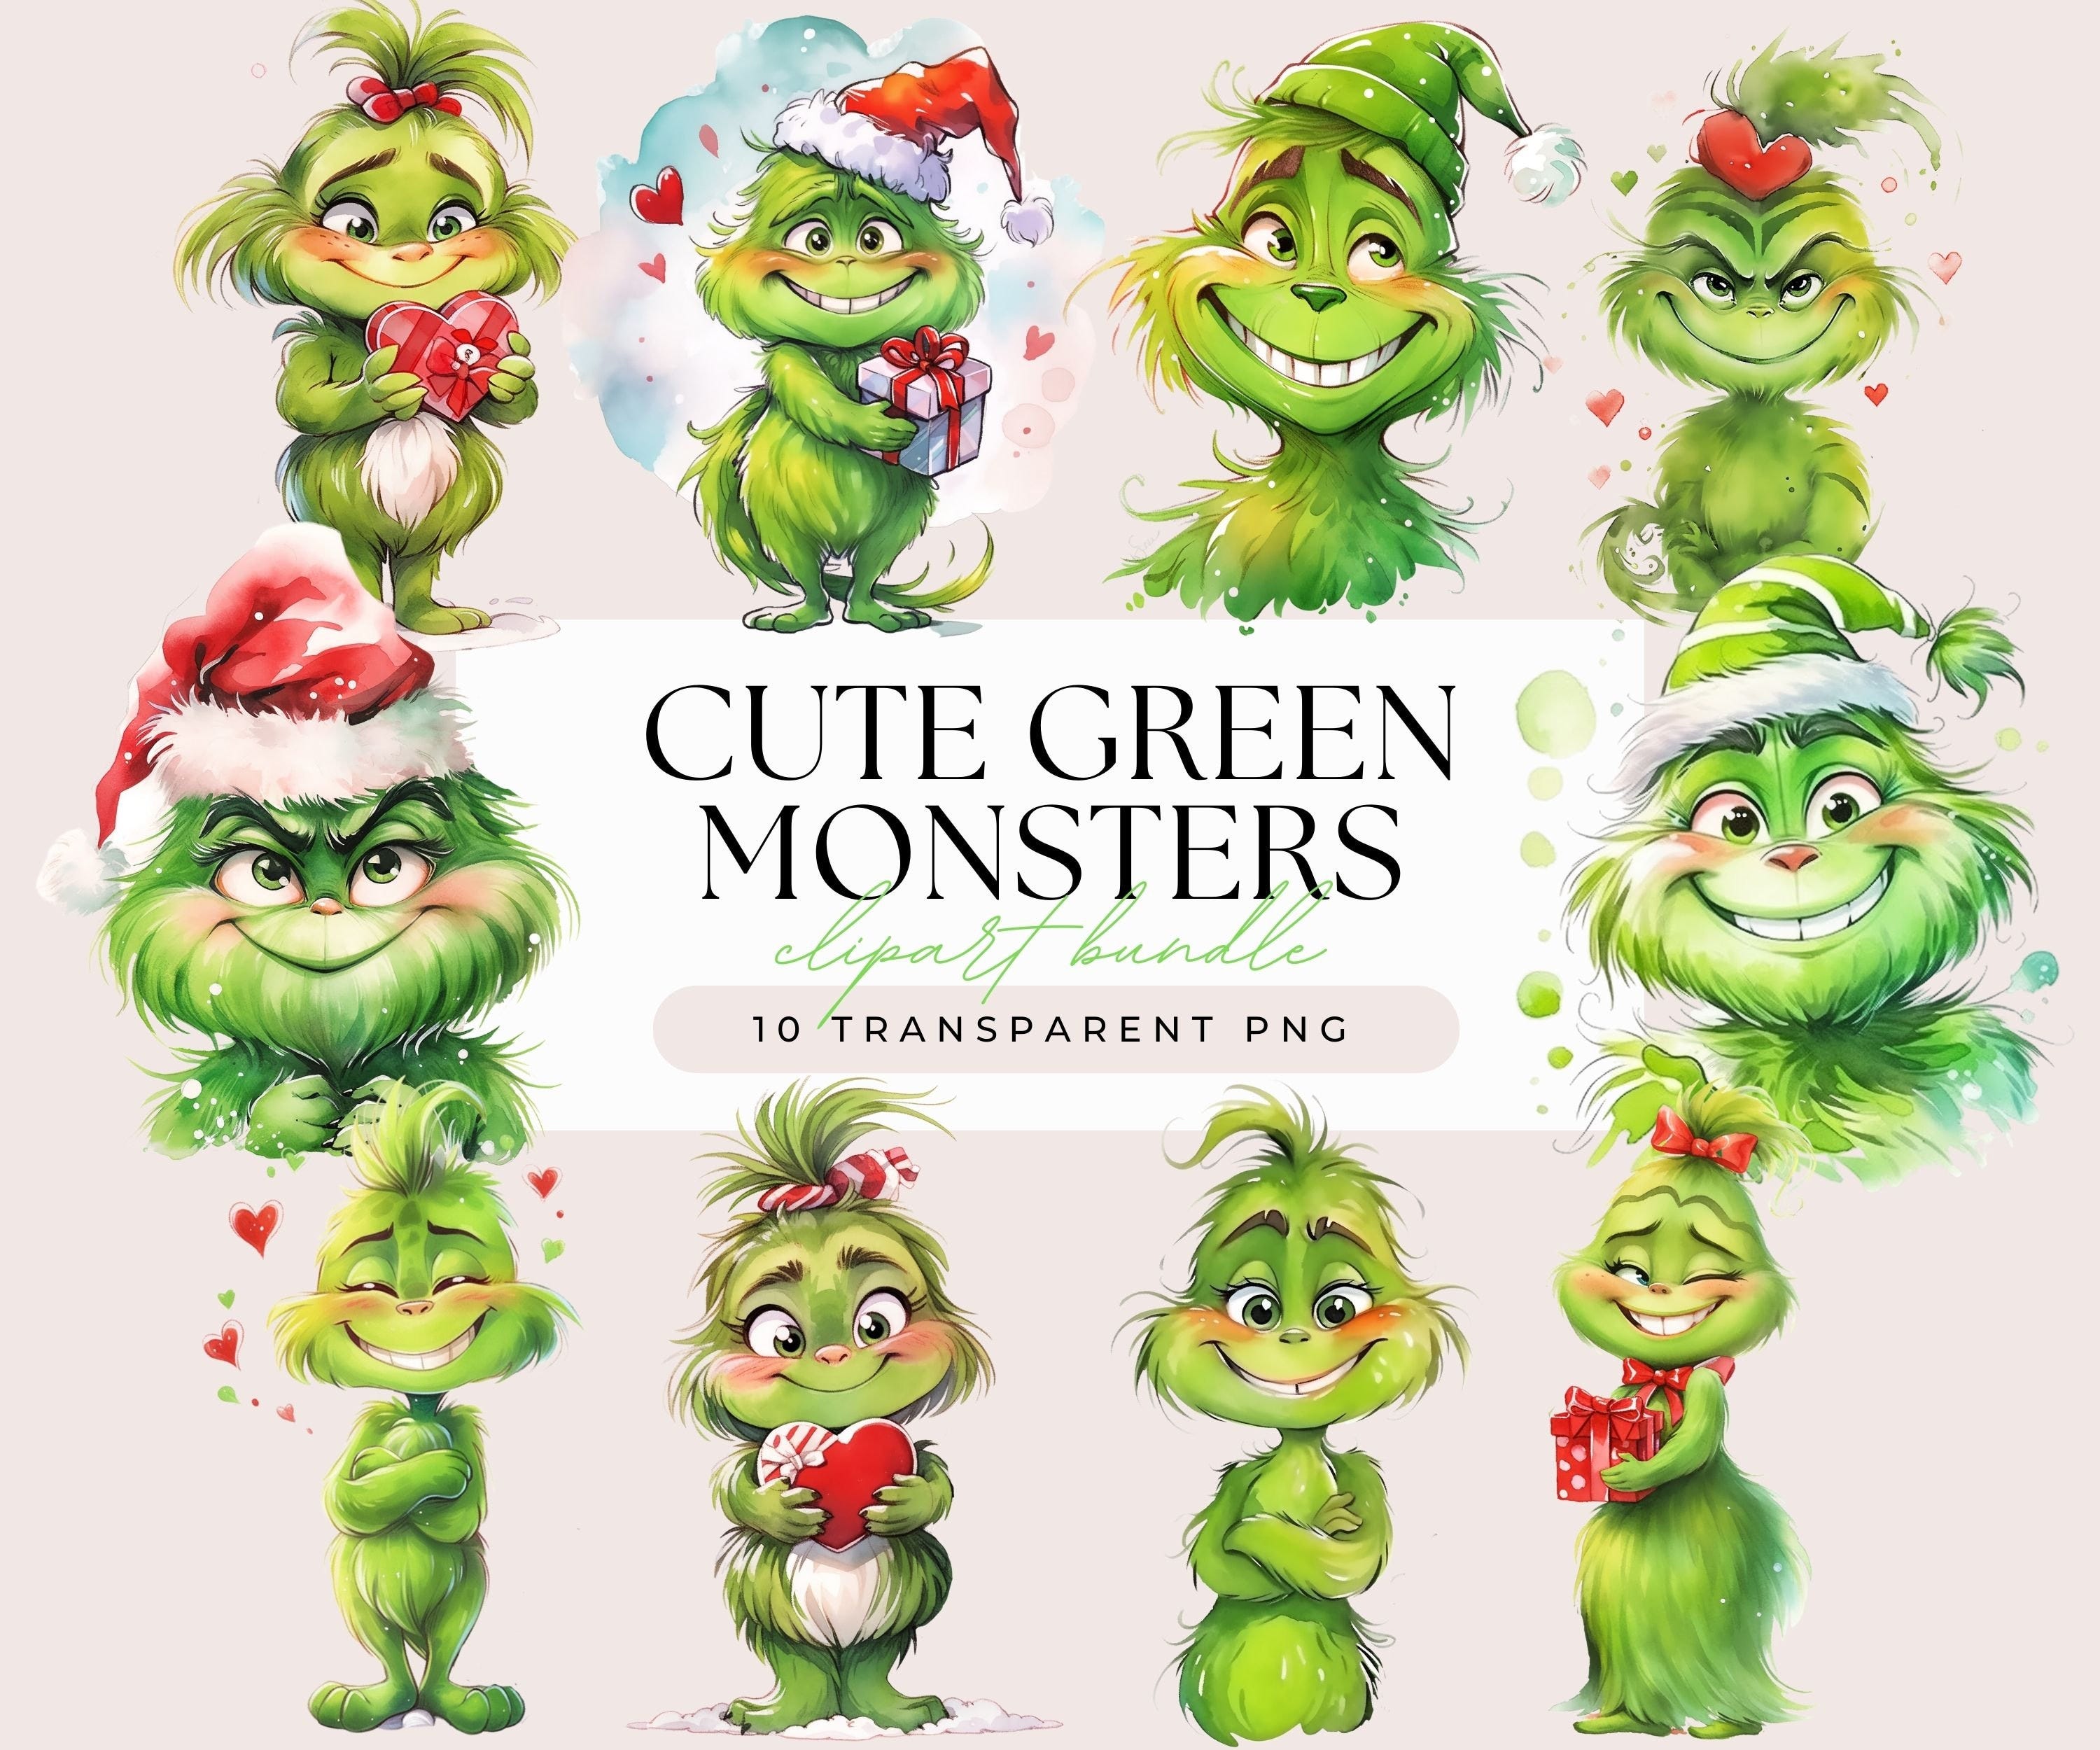 Cute Green Monster Clipart Bundle - Watercolor Christmas Festive Green Fluffy Movie Monsters - Transparent Background 10 PNG Graphics